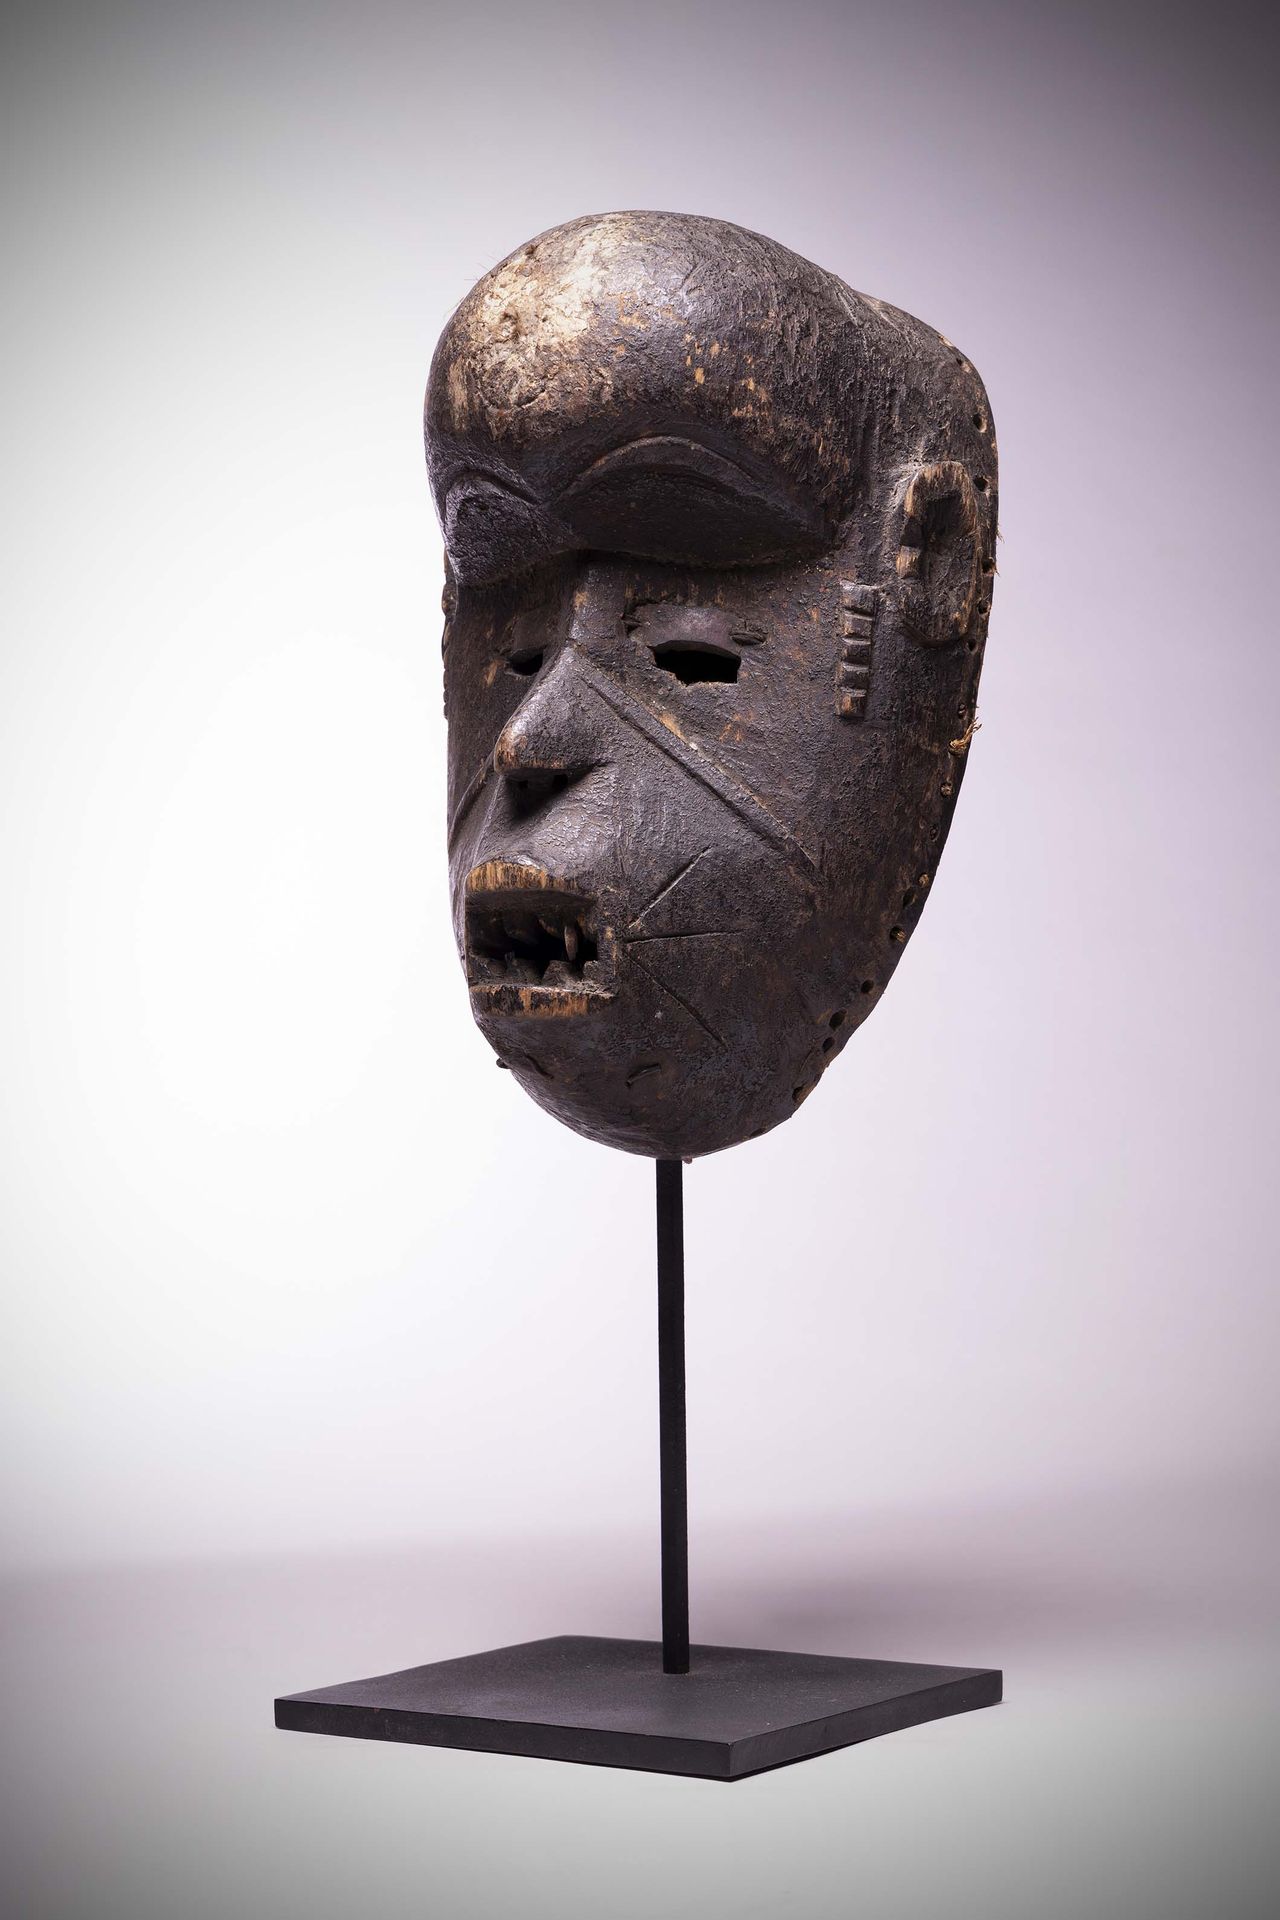 Null Idoma

Igala

(Nigeria) Very old mask with a bulging forehead of the "Ichah&hellip;